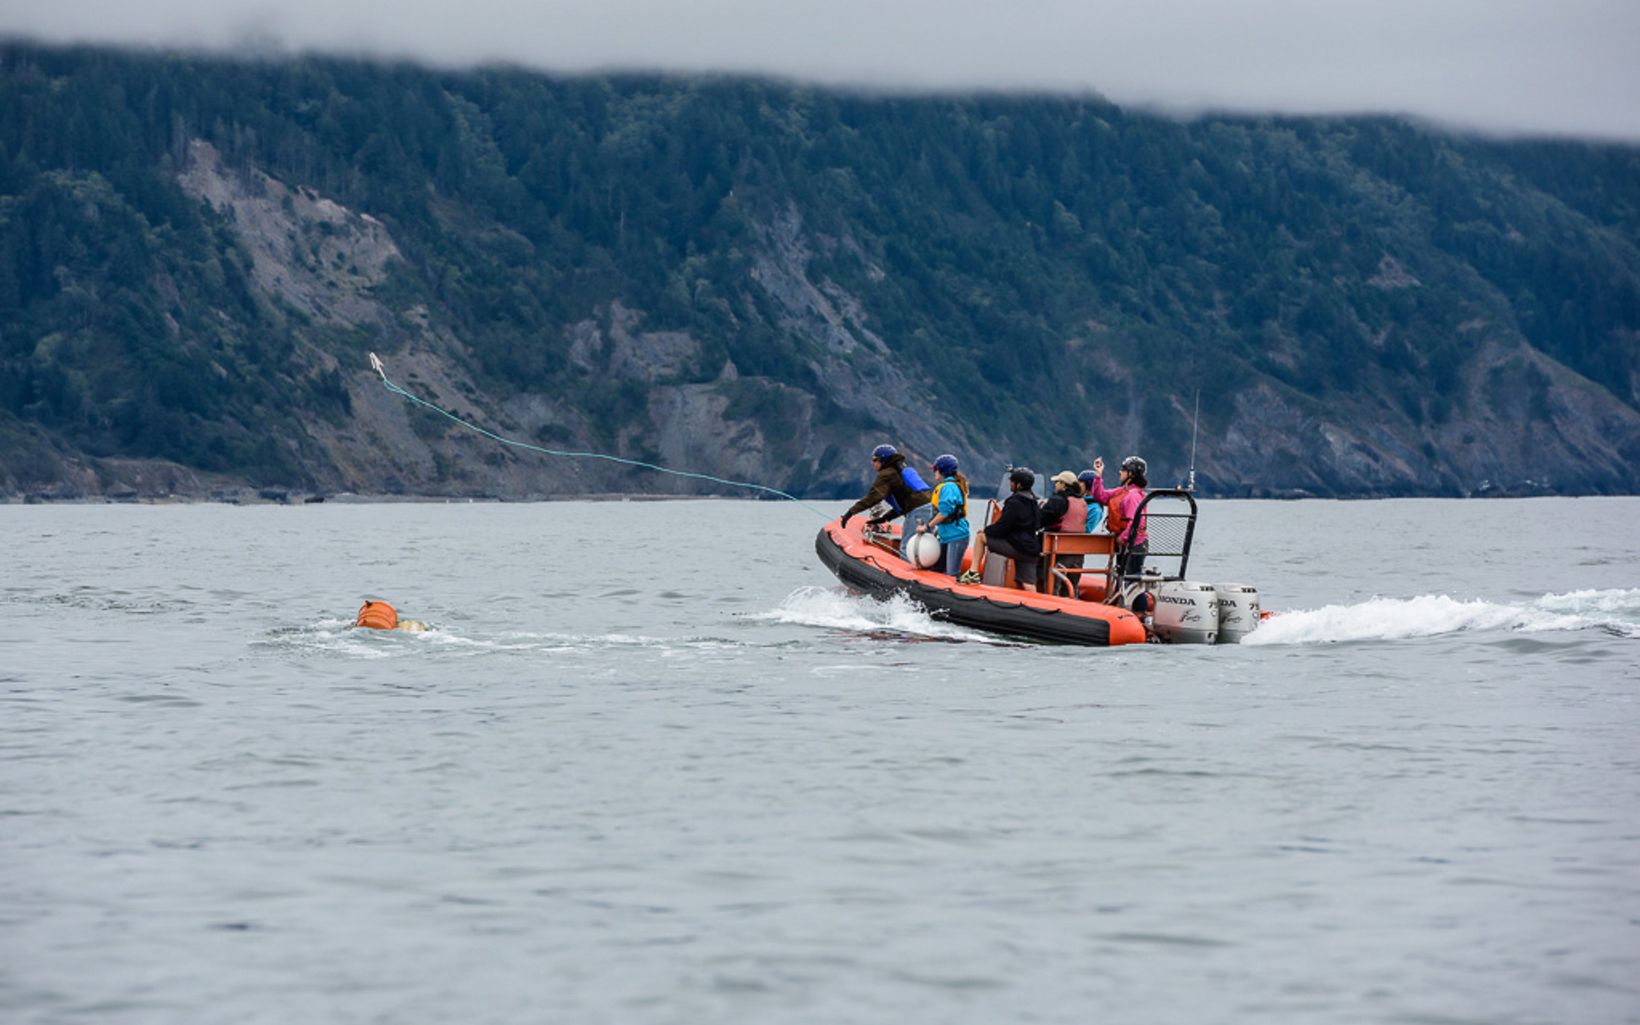 A group of people in an orange inflatable dinghy. One of them is in the process of throwing out a line in the direction of a crab pot buoy in the water.